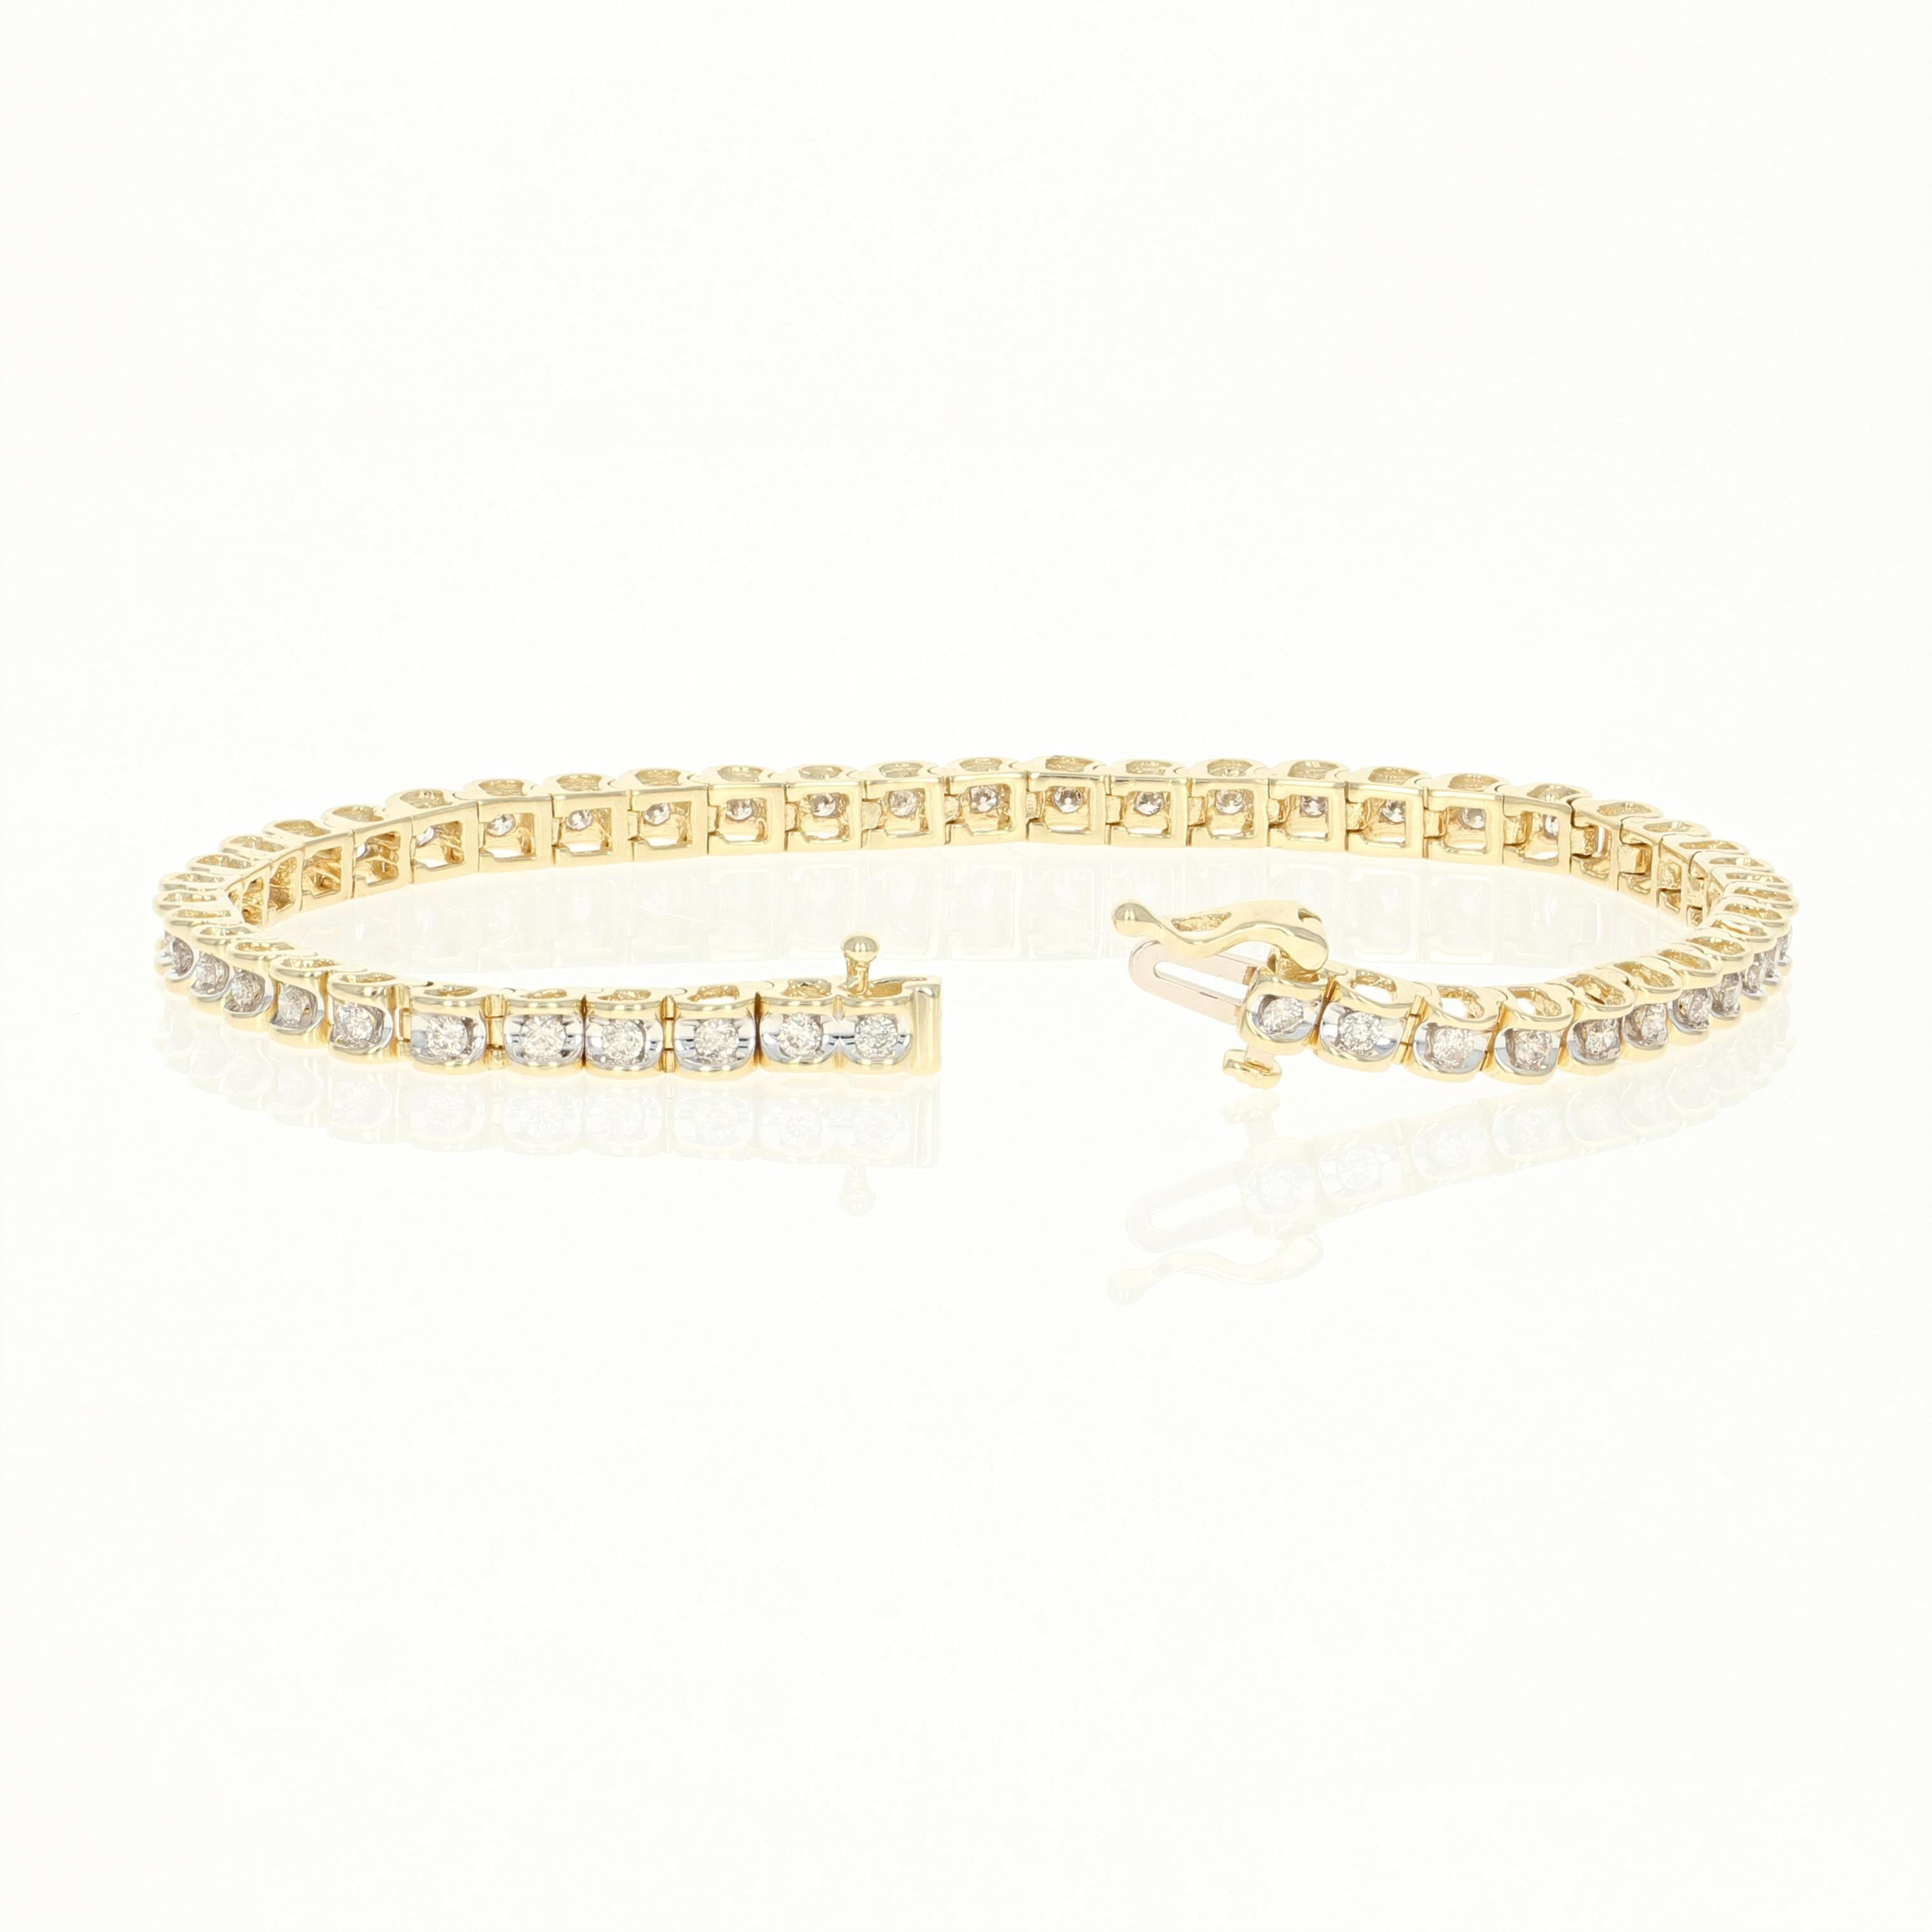 This year give her the radiant gift of diamonds! Fashioned in a classically elegant tennis style, this 14k yellow and white gold bracelet showcases sparkling white diamonds displayed atop scalloped links. 

Metal Content: Guaranteed 14k Gold as